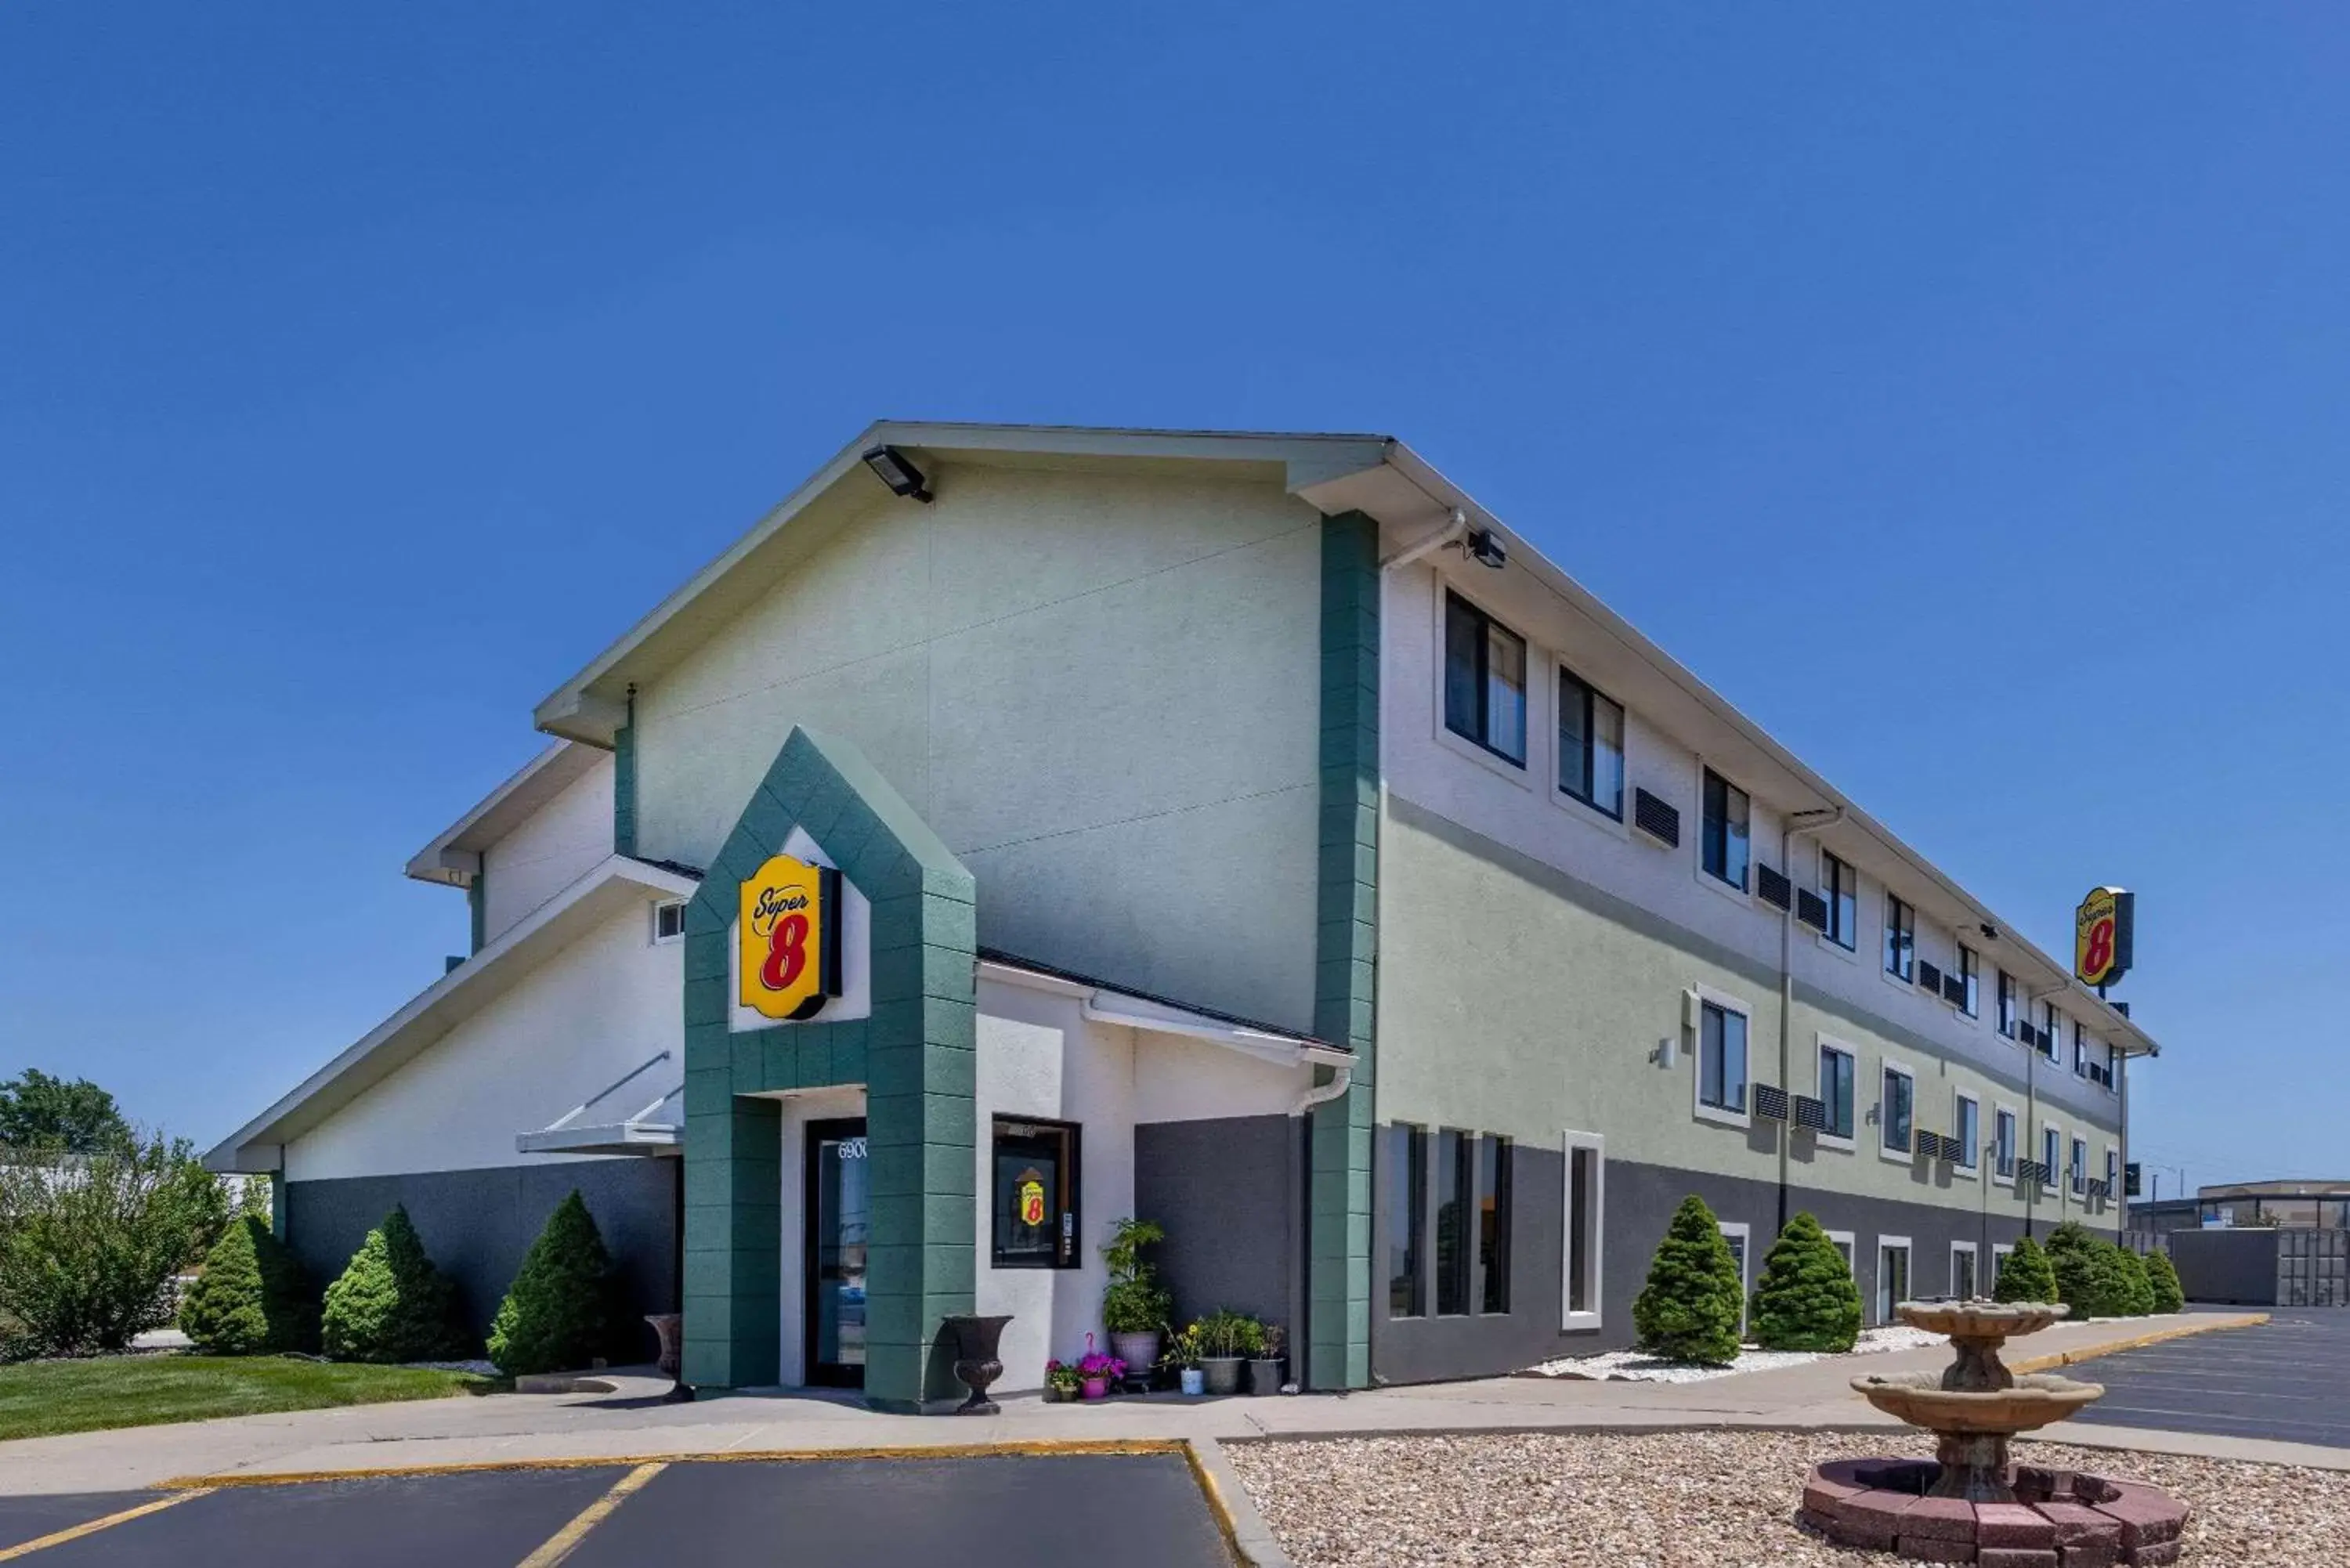 Property Building in Super 8 by Wyndham Kansas City at Barry Road/Airport